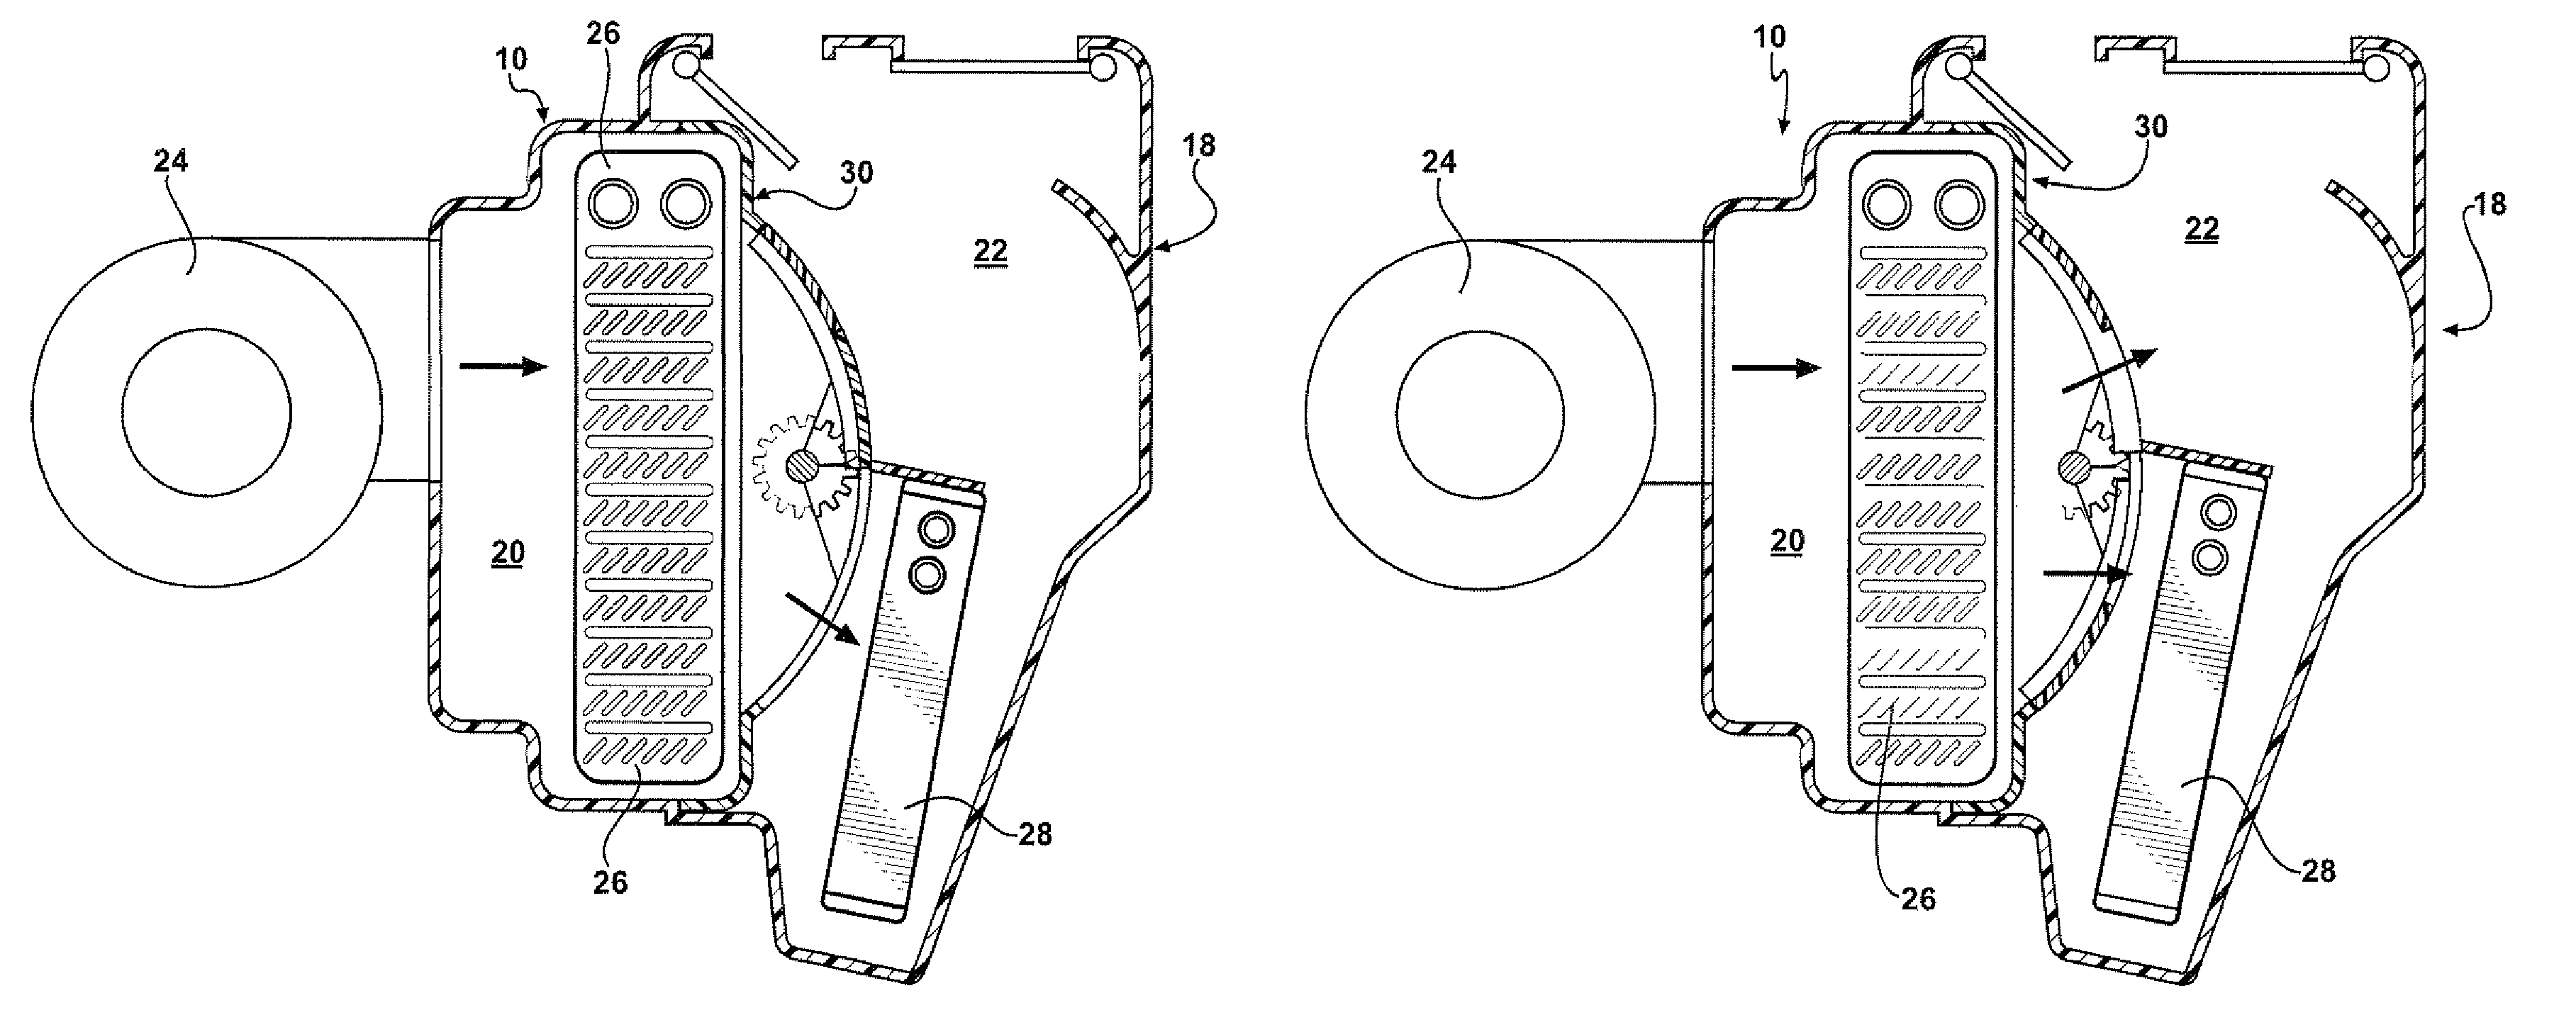 Sequential valve member driving mechanism for an HVAC system